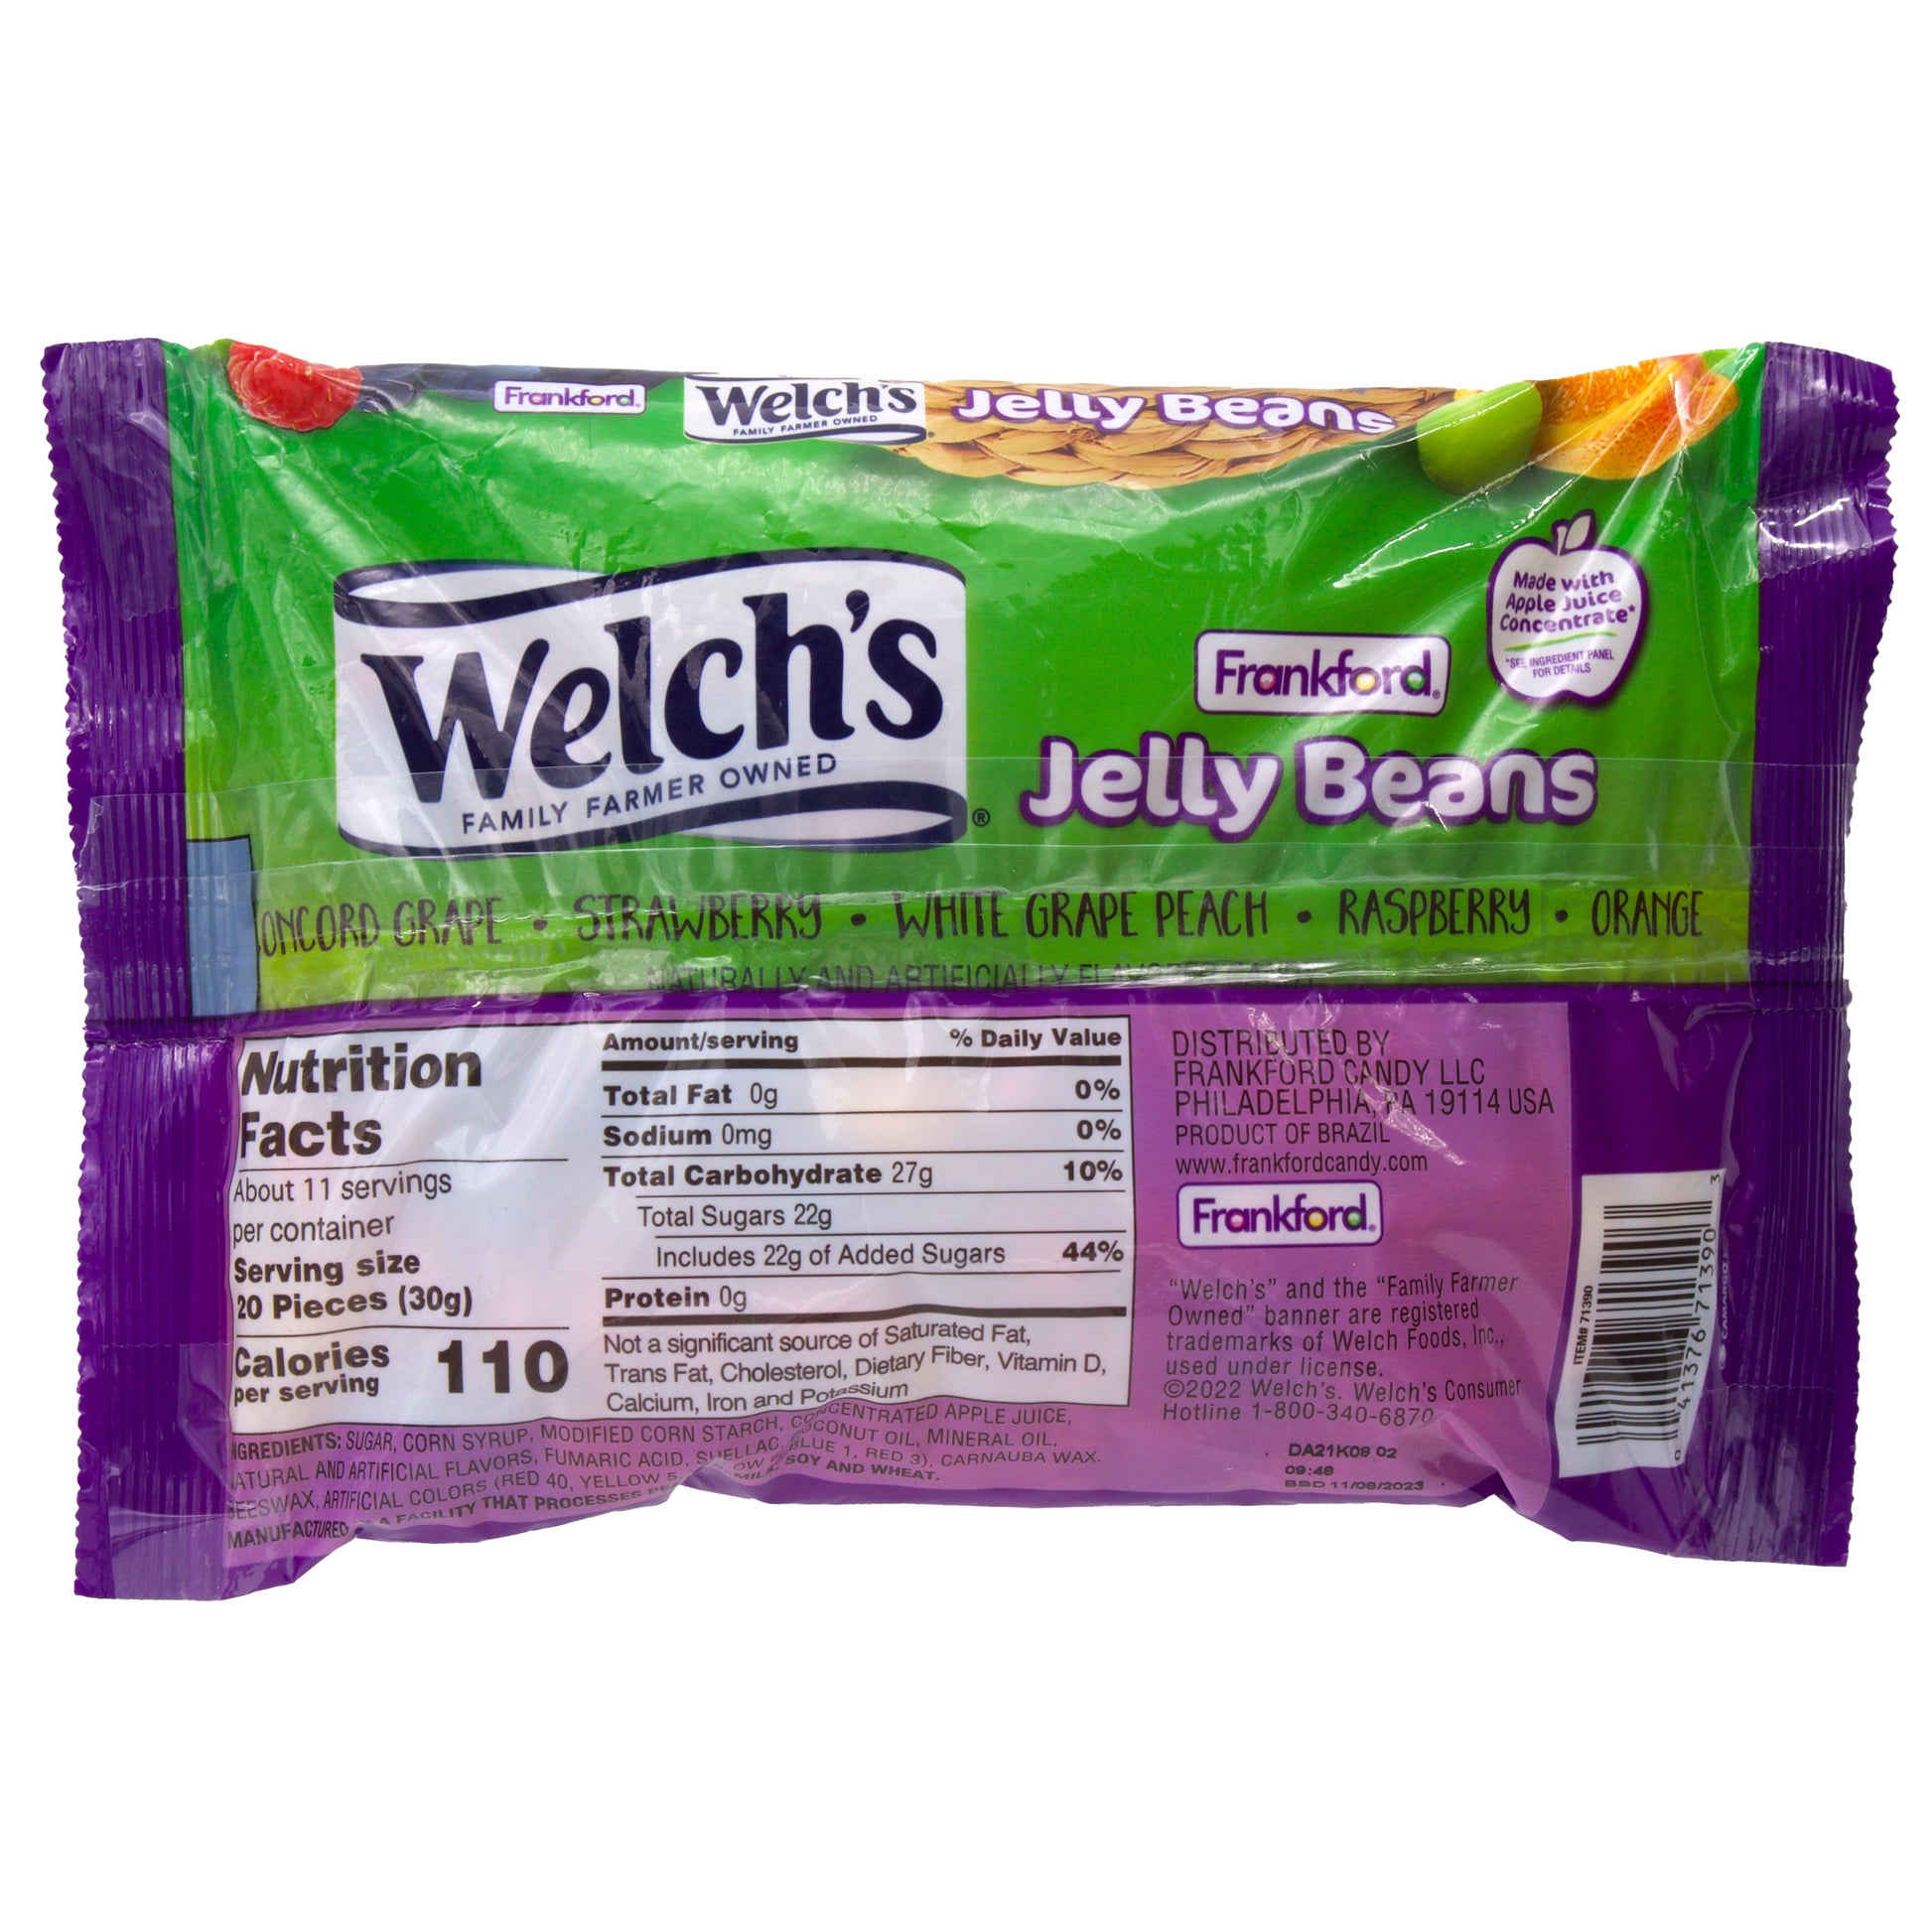 green and purple bag with nutrition facts and ingredients